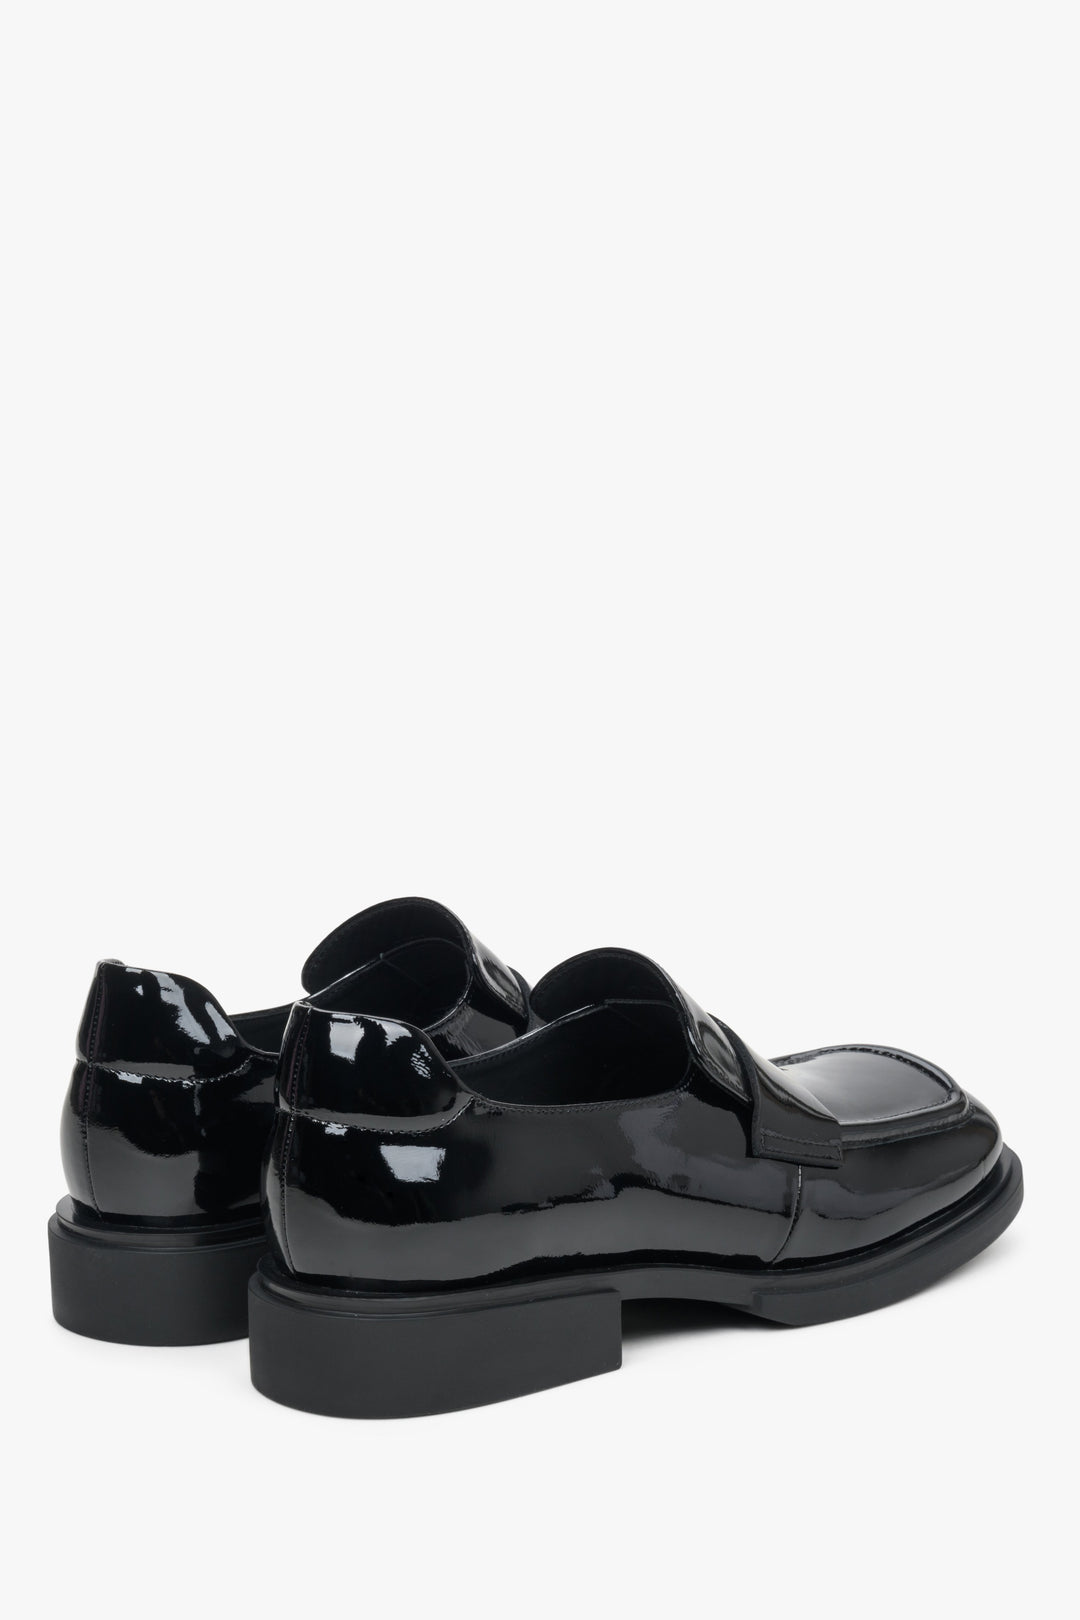 Women's black, patent leather moccasins with a square toe - side view and heel.